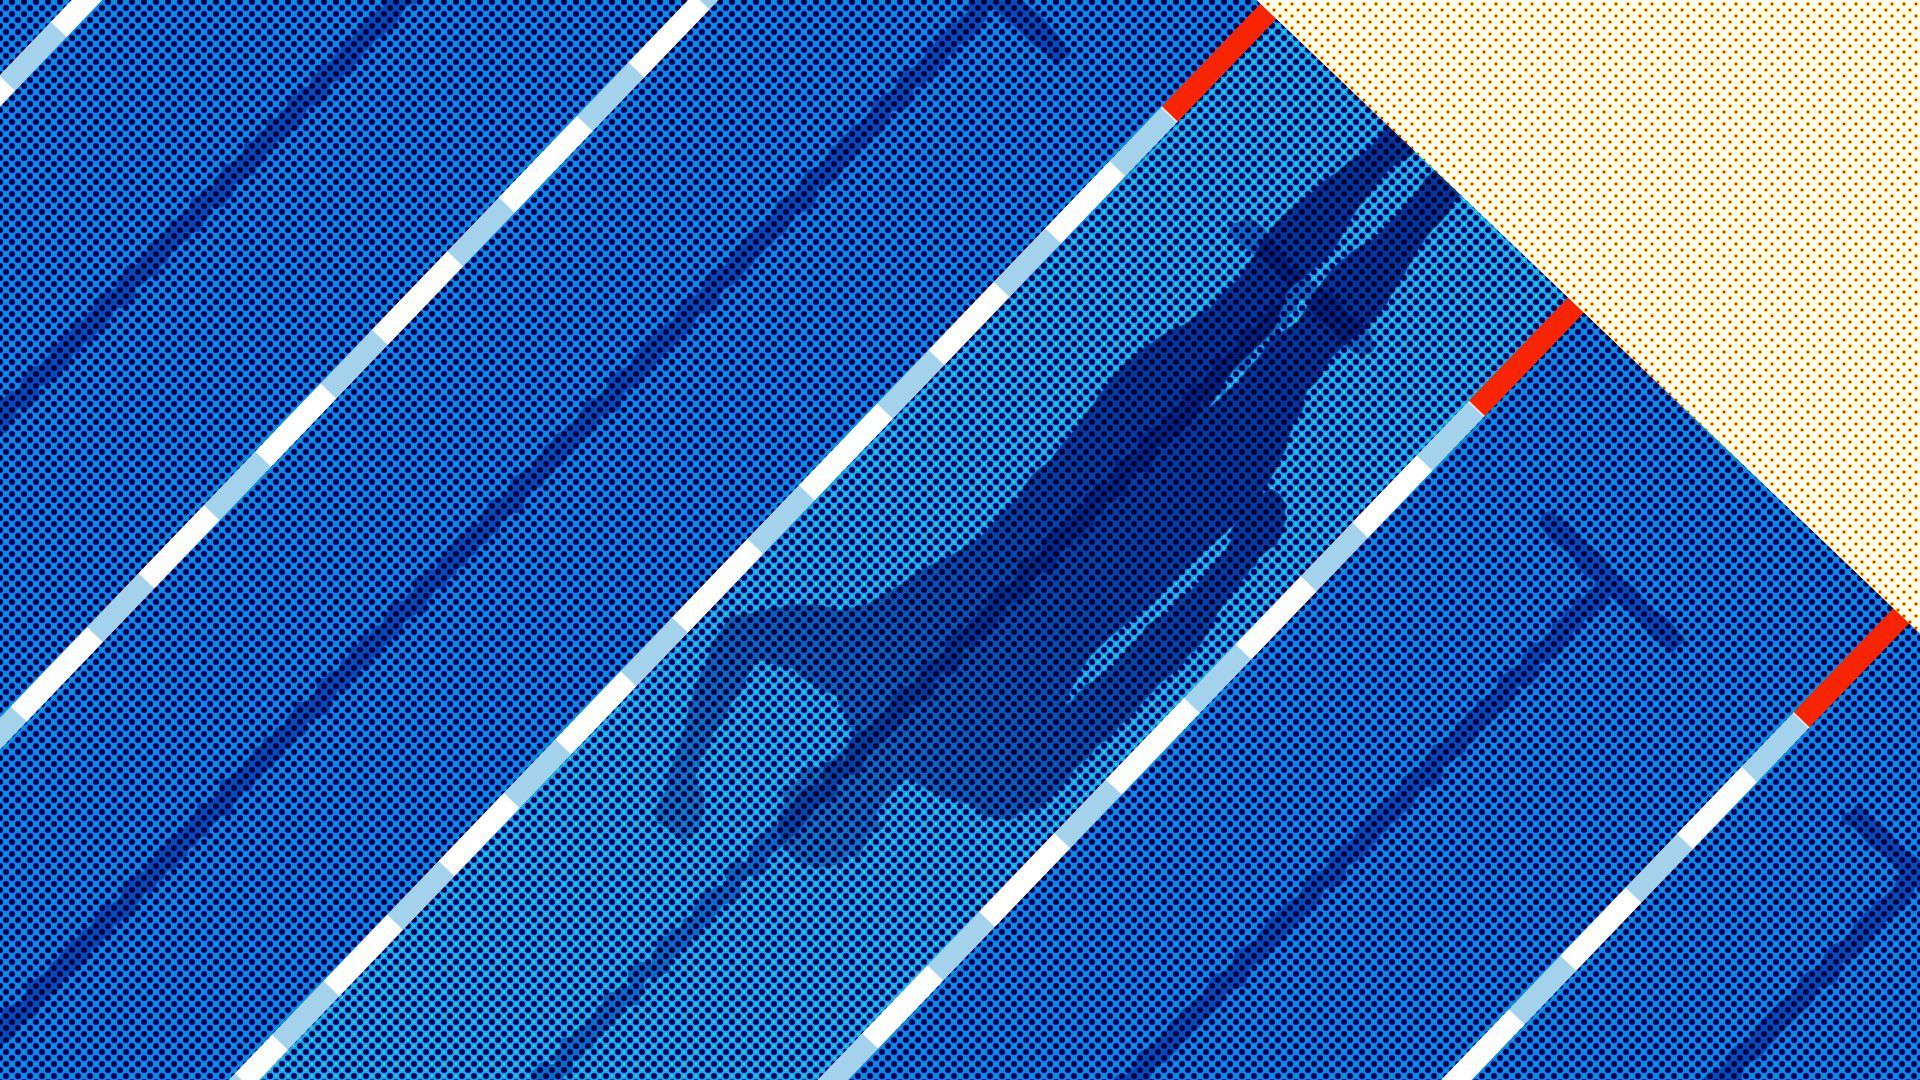 Illustration of a shadow of Michael Phelps being cast over a swimmer pool